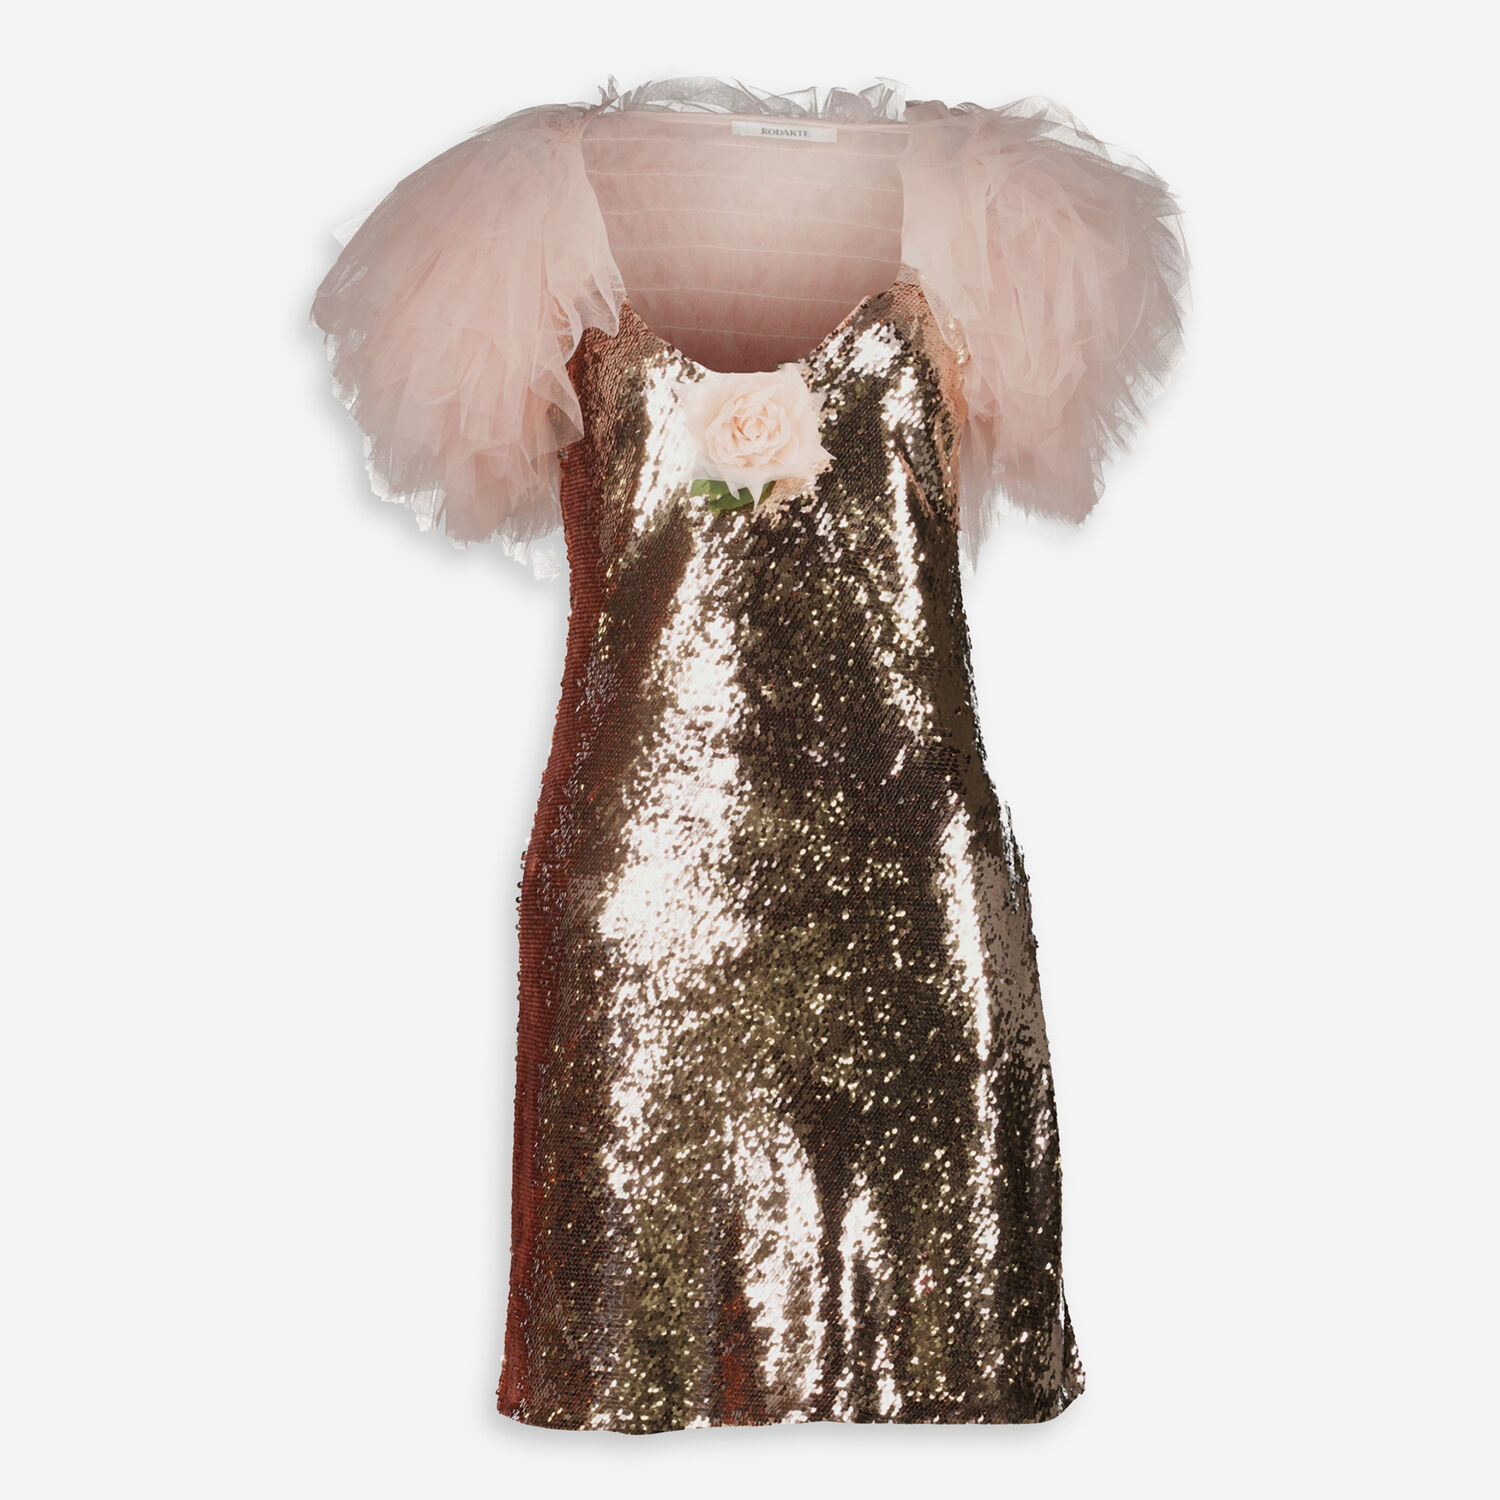 Two Piece Rose Gold Sequin Dress - TK Maxx UK